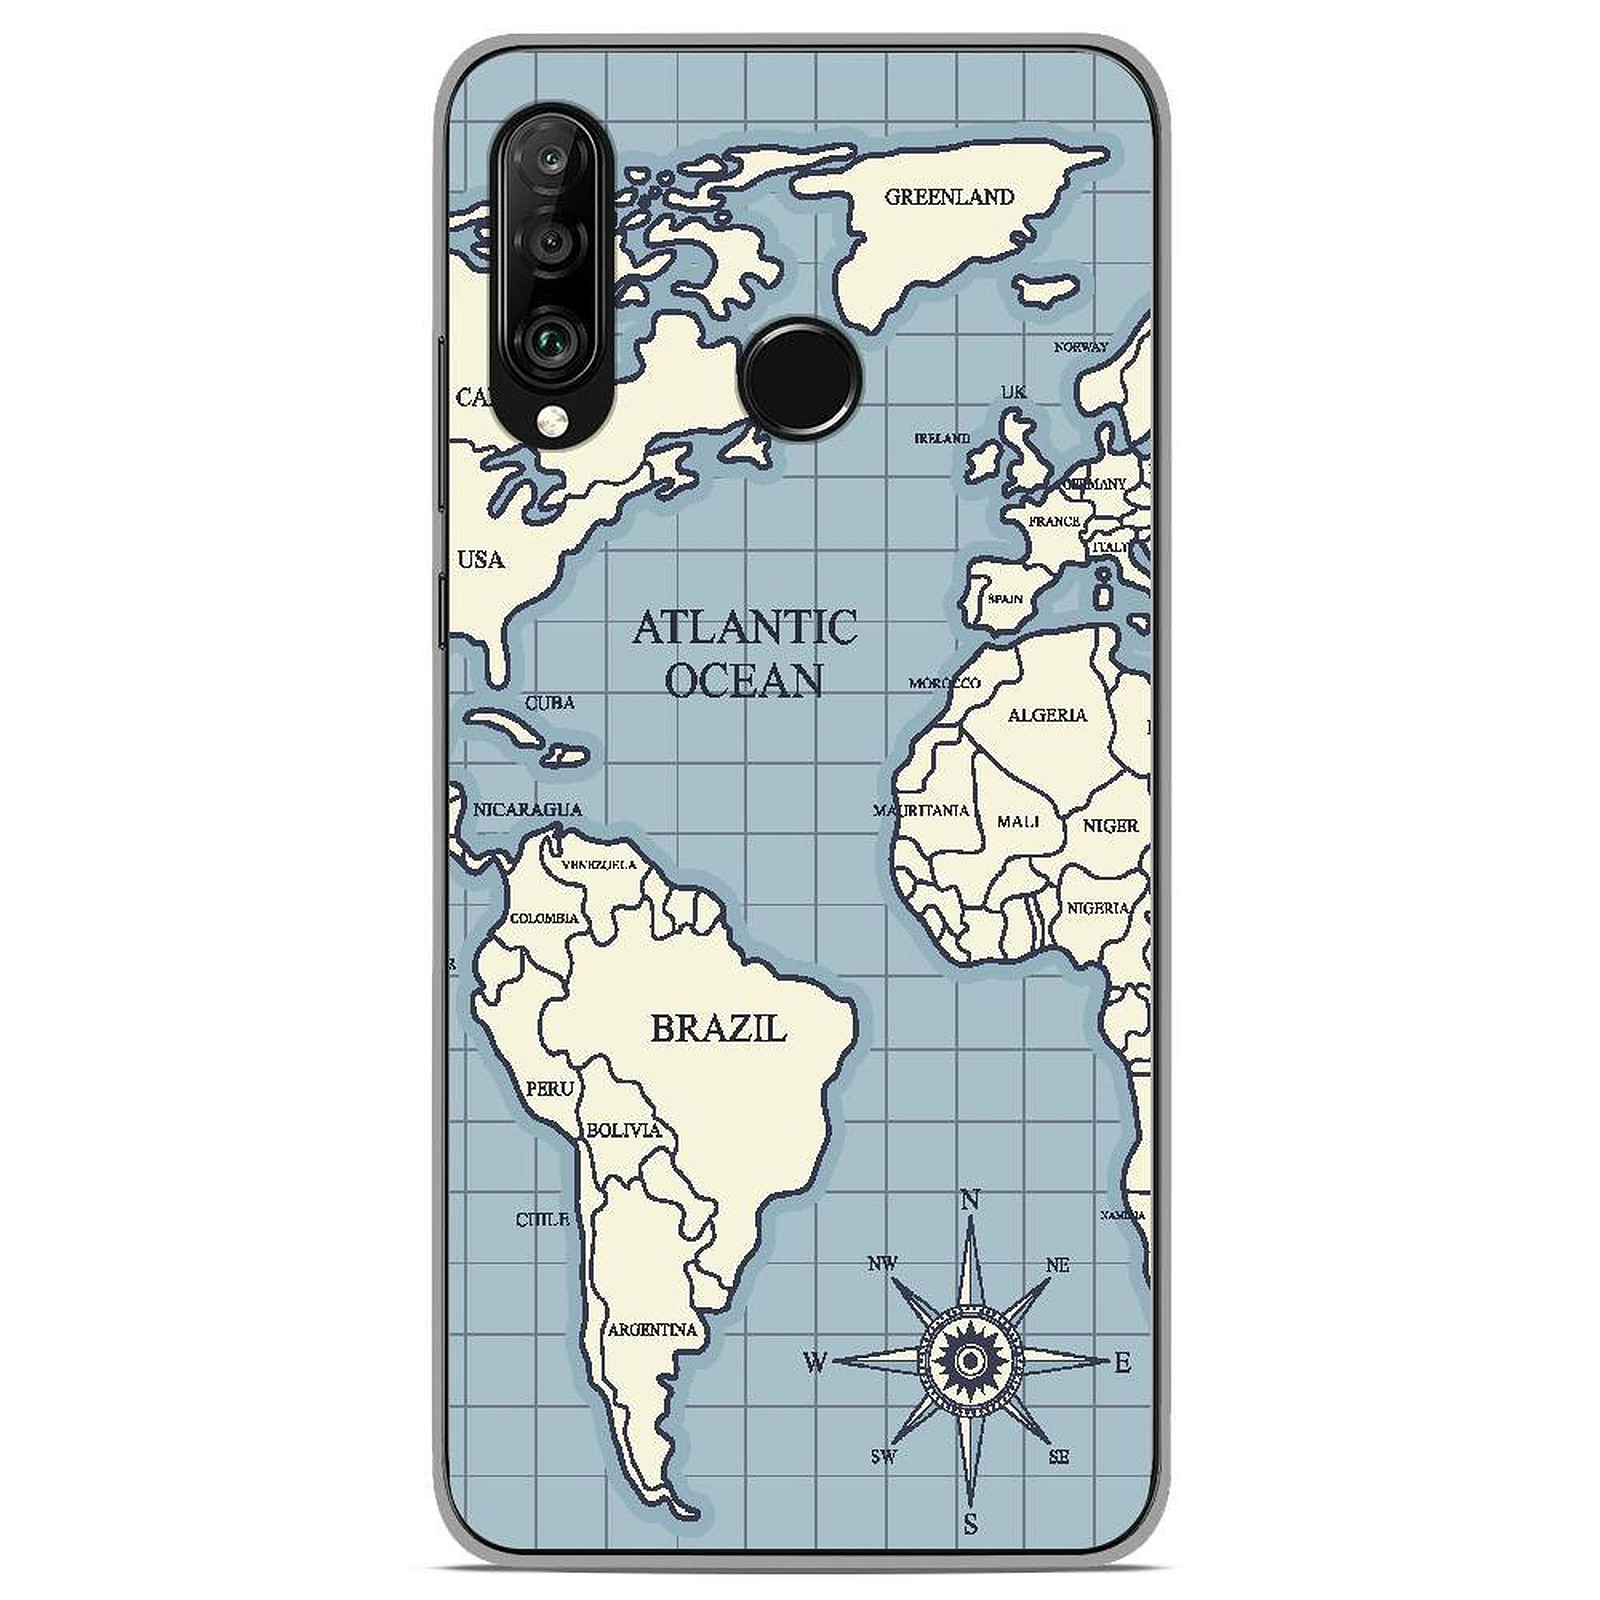 1001 Coques Coque silicone gel Huawei P30 Lite motif Map vintage - Coque telephone 1001Coques